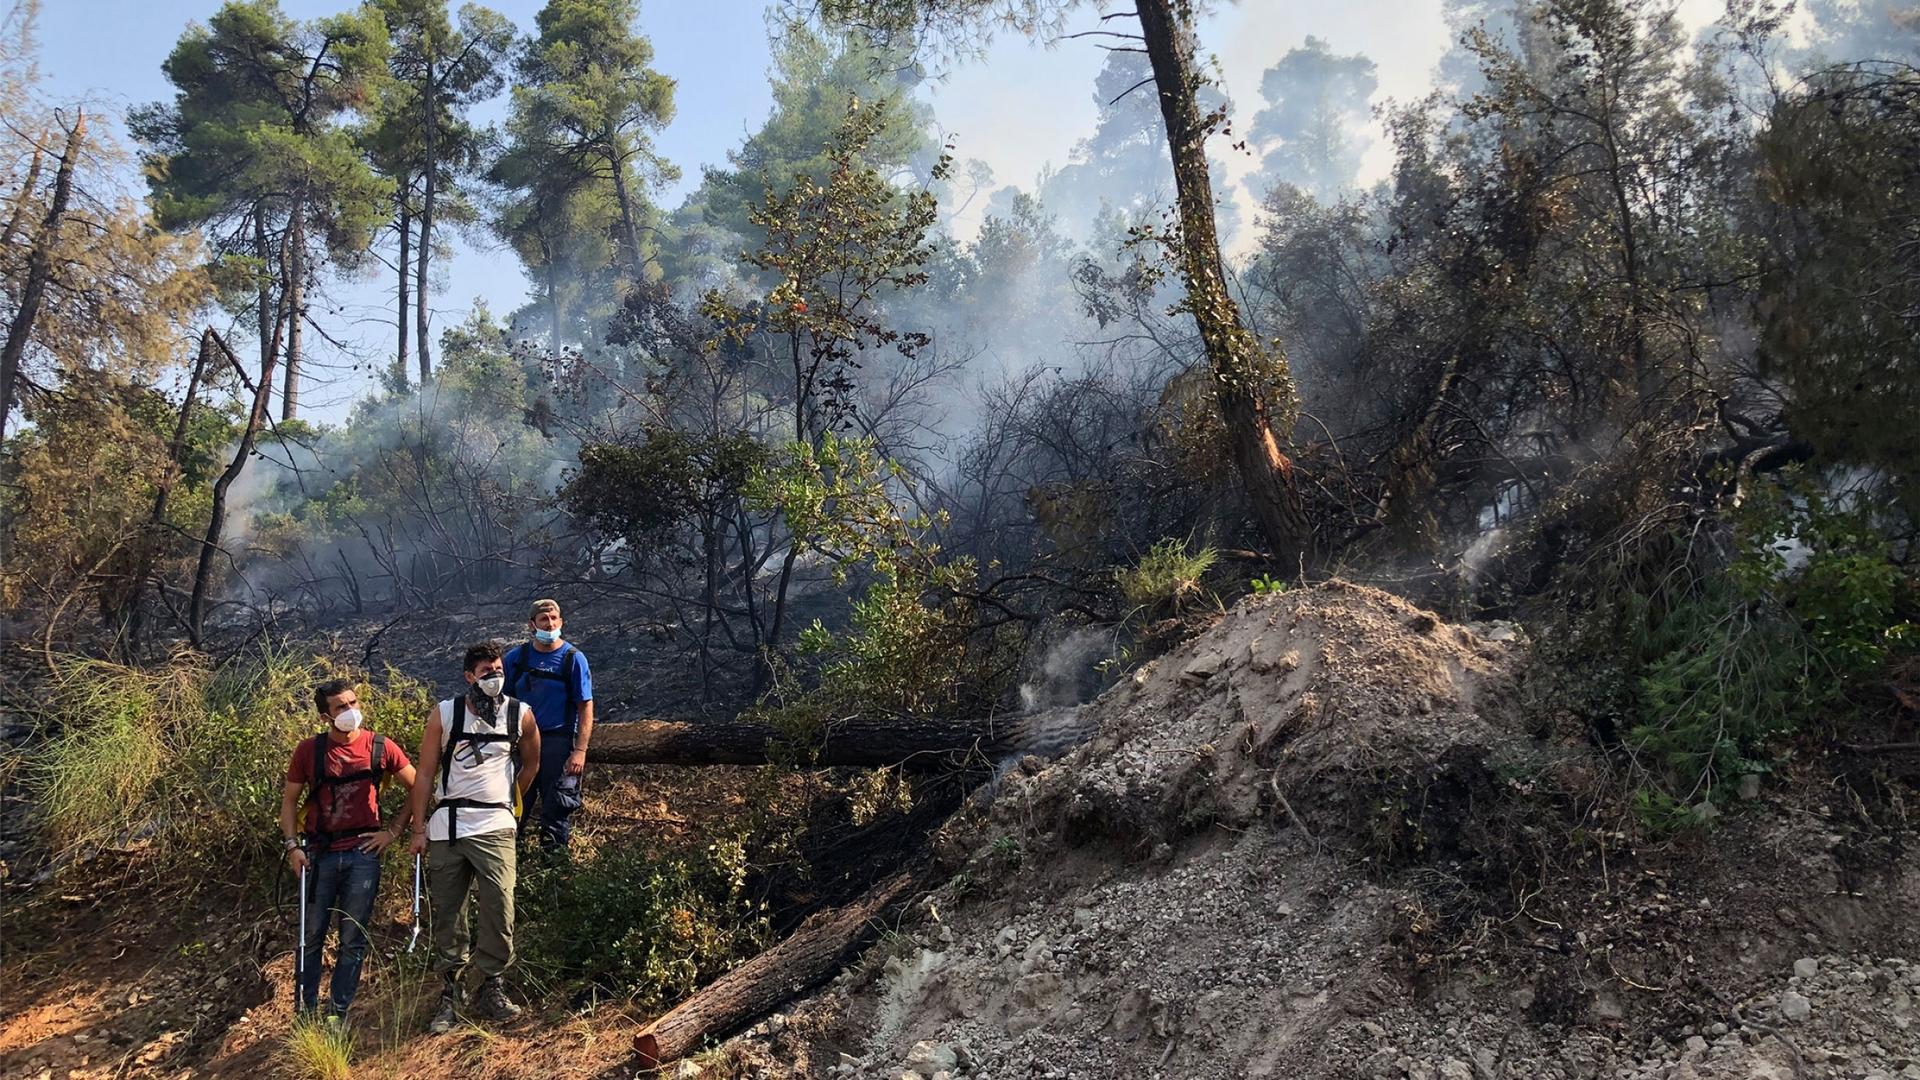 A group of three people are shown in a forested area with the smoke from fires rising in the background.